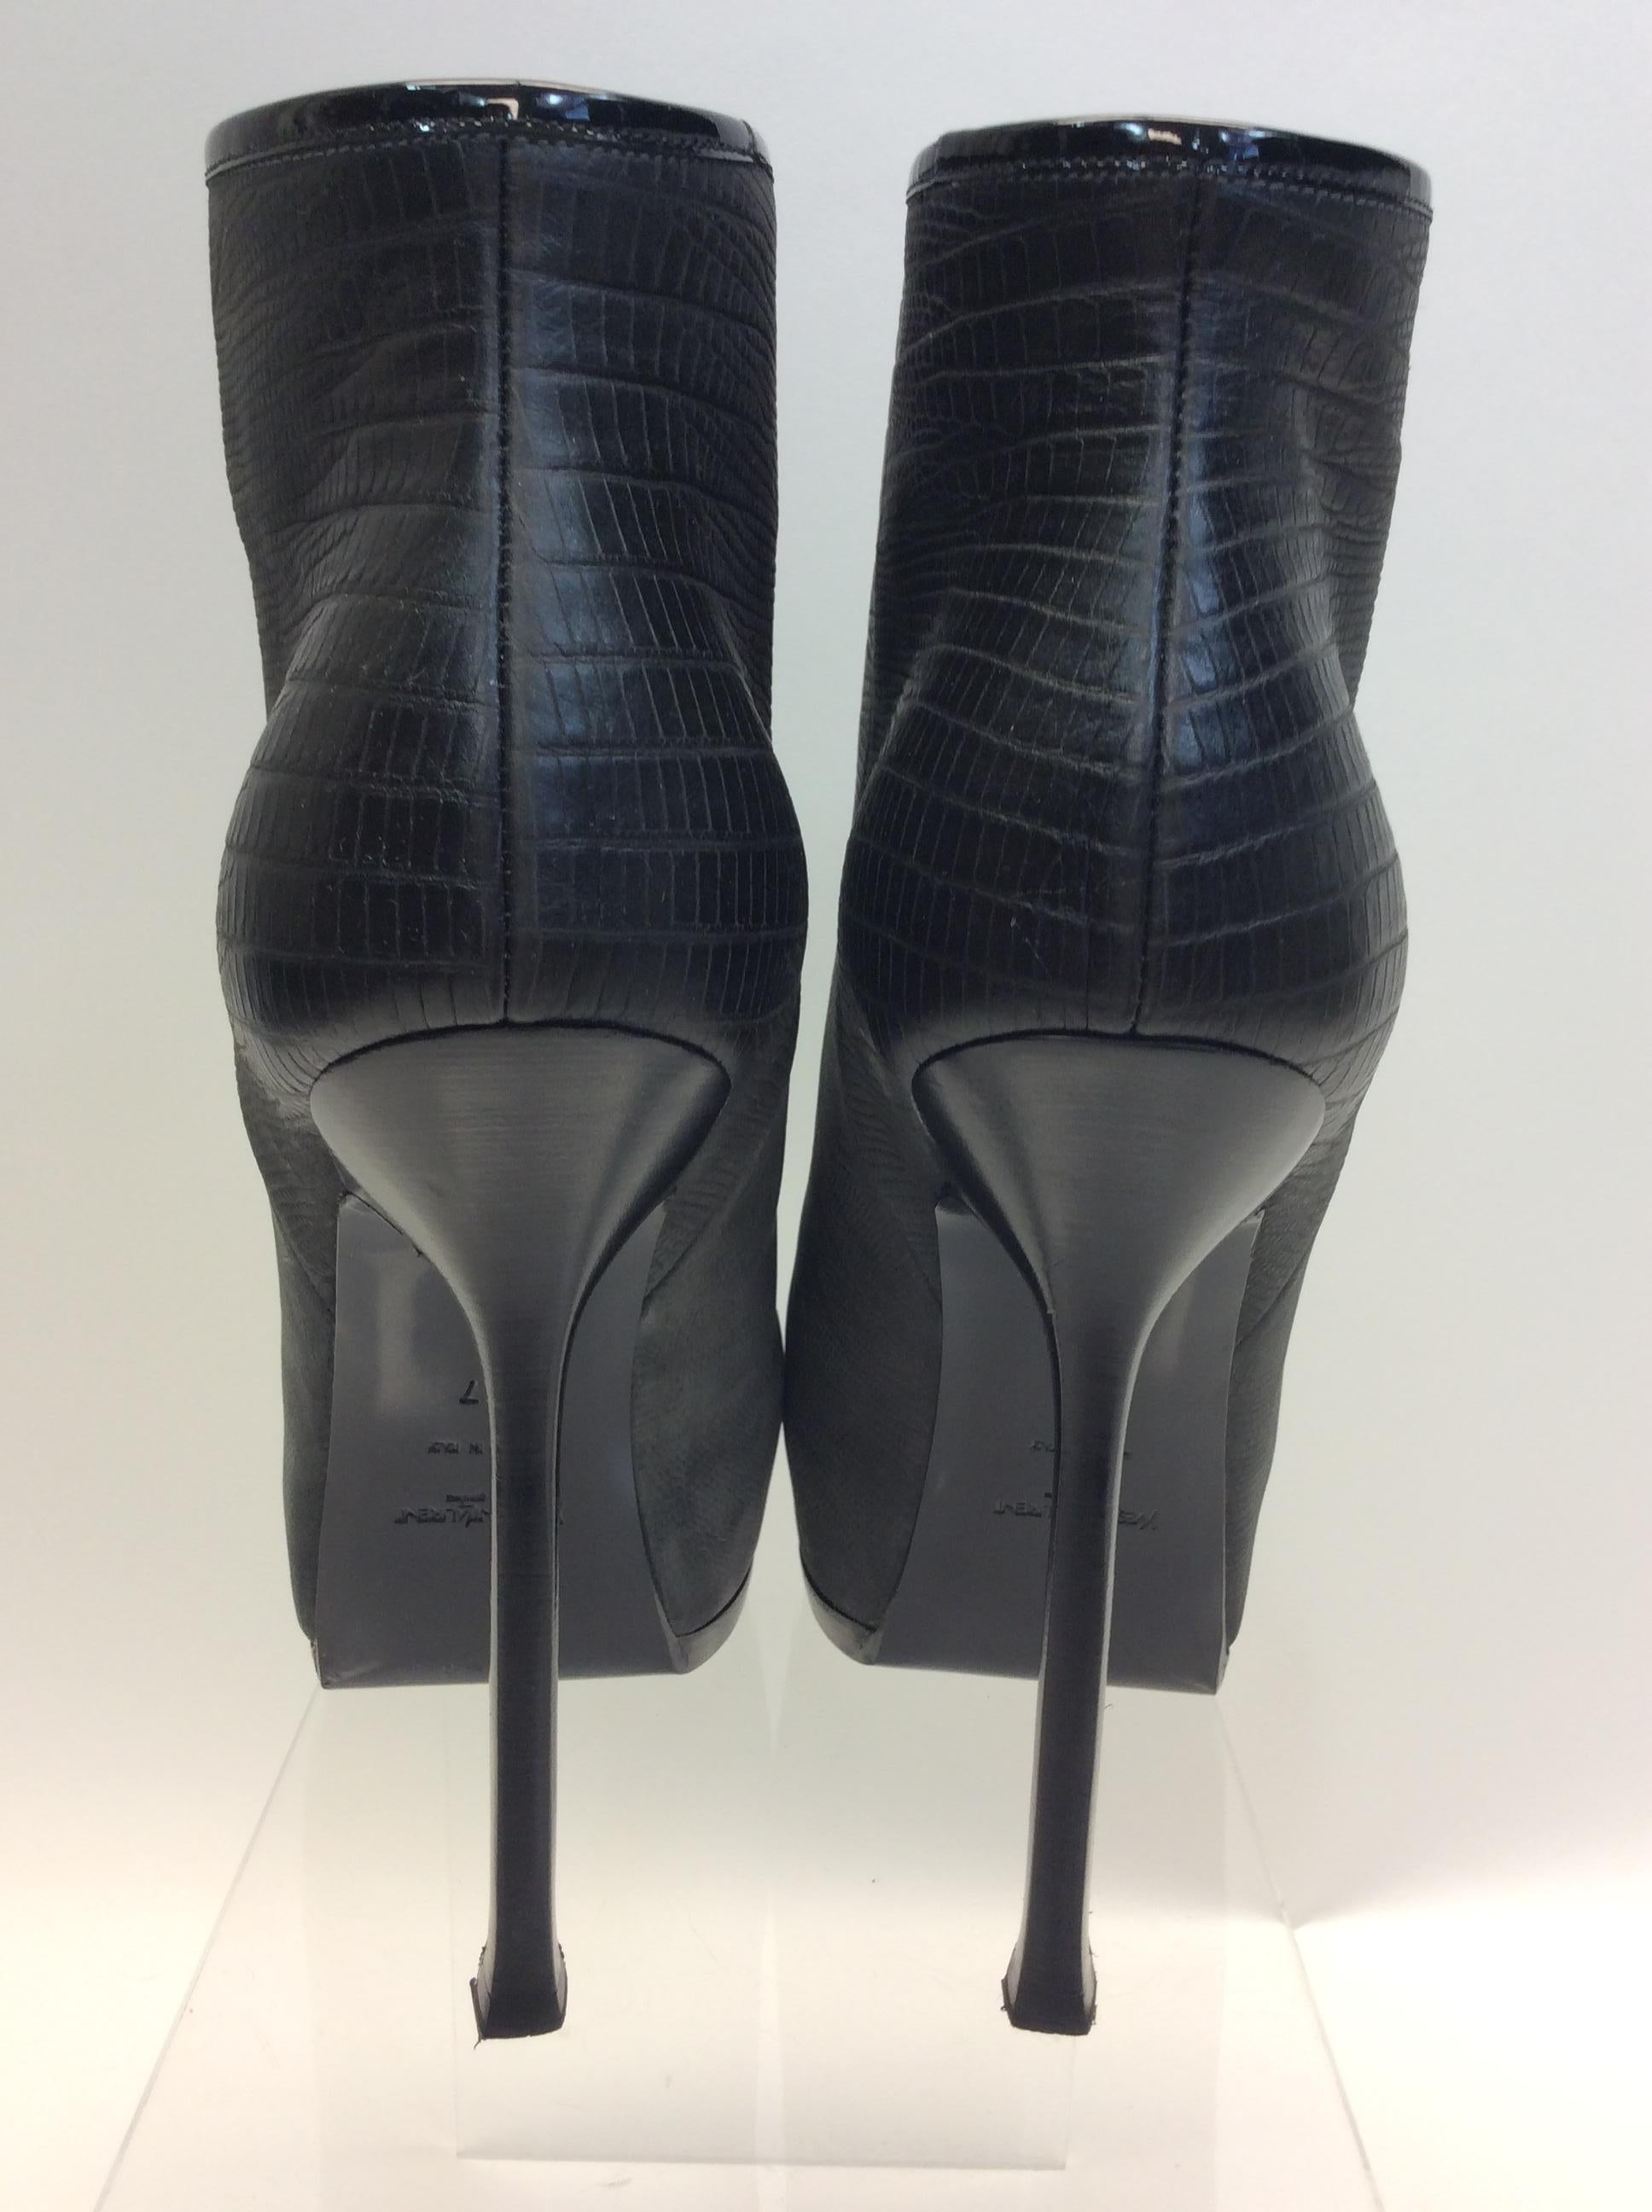 Yves Saint Laurent Black Leather Bootie In Excellent Condition For Sale In Narberth, PA